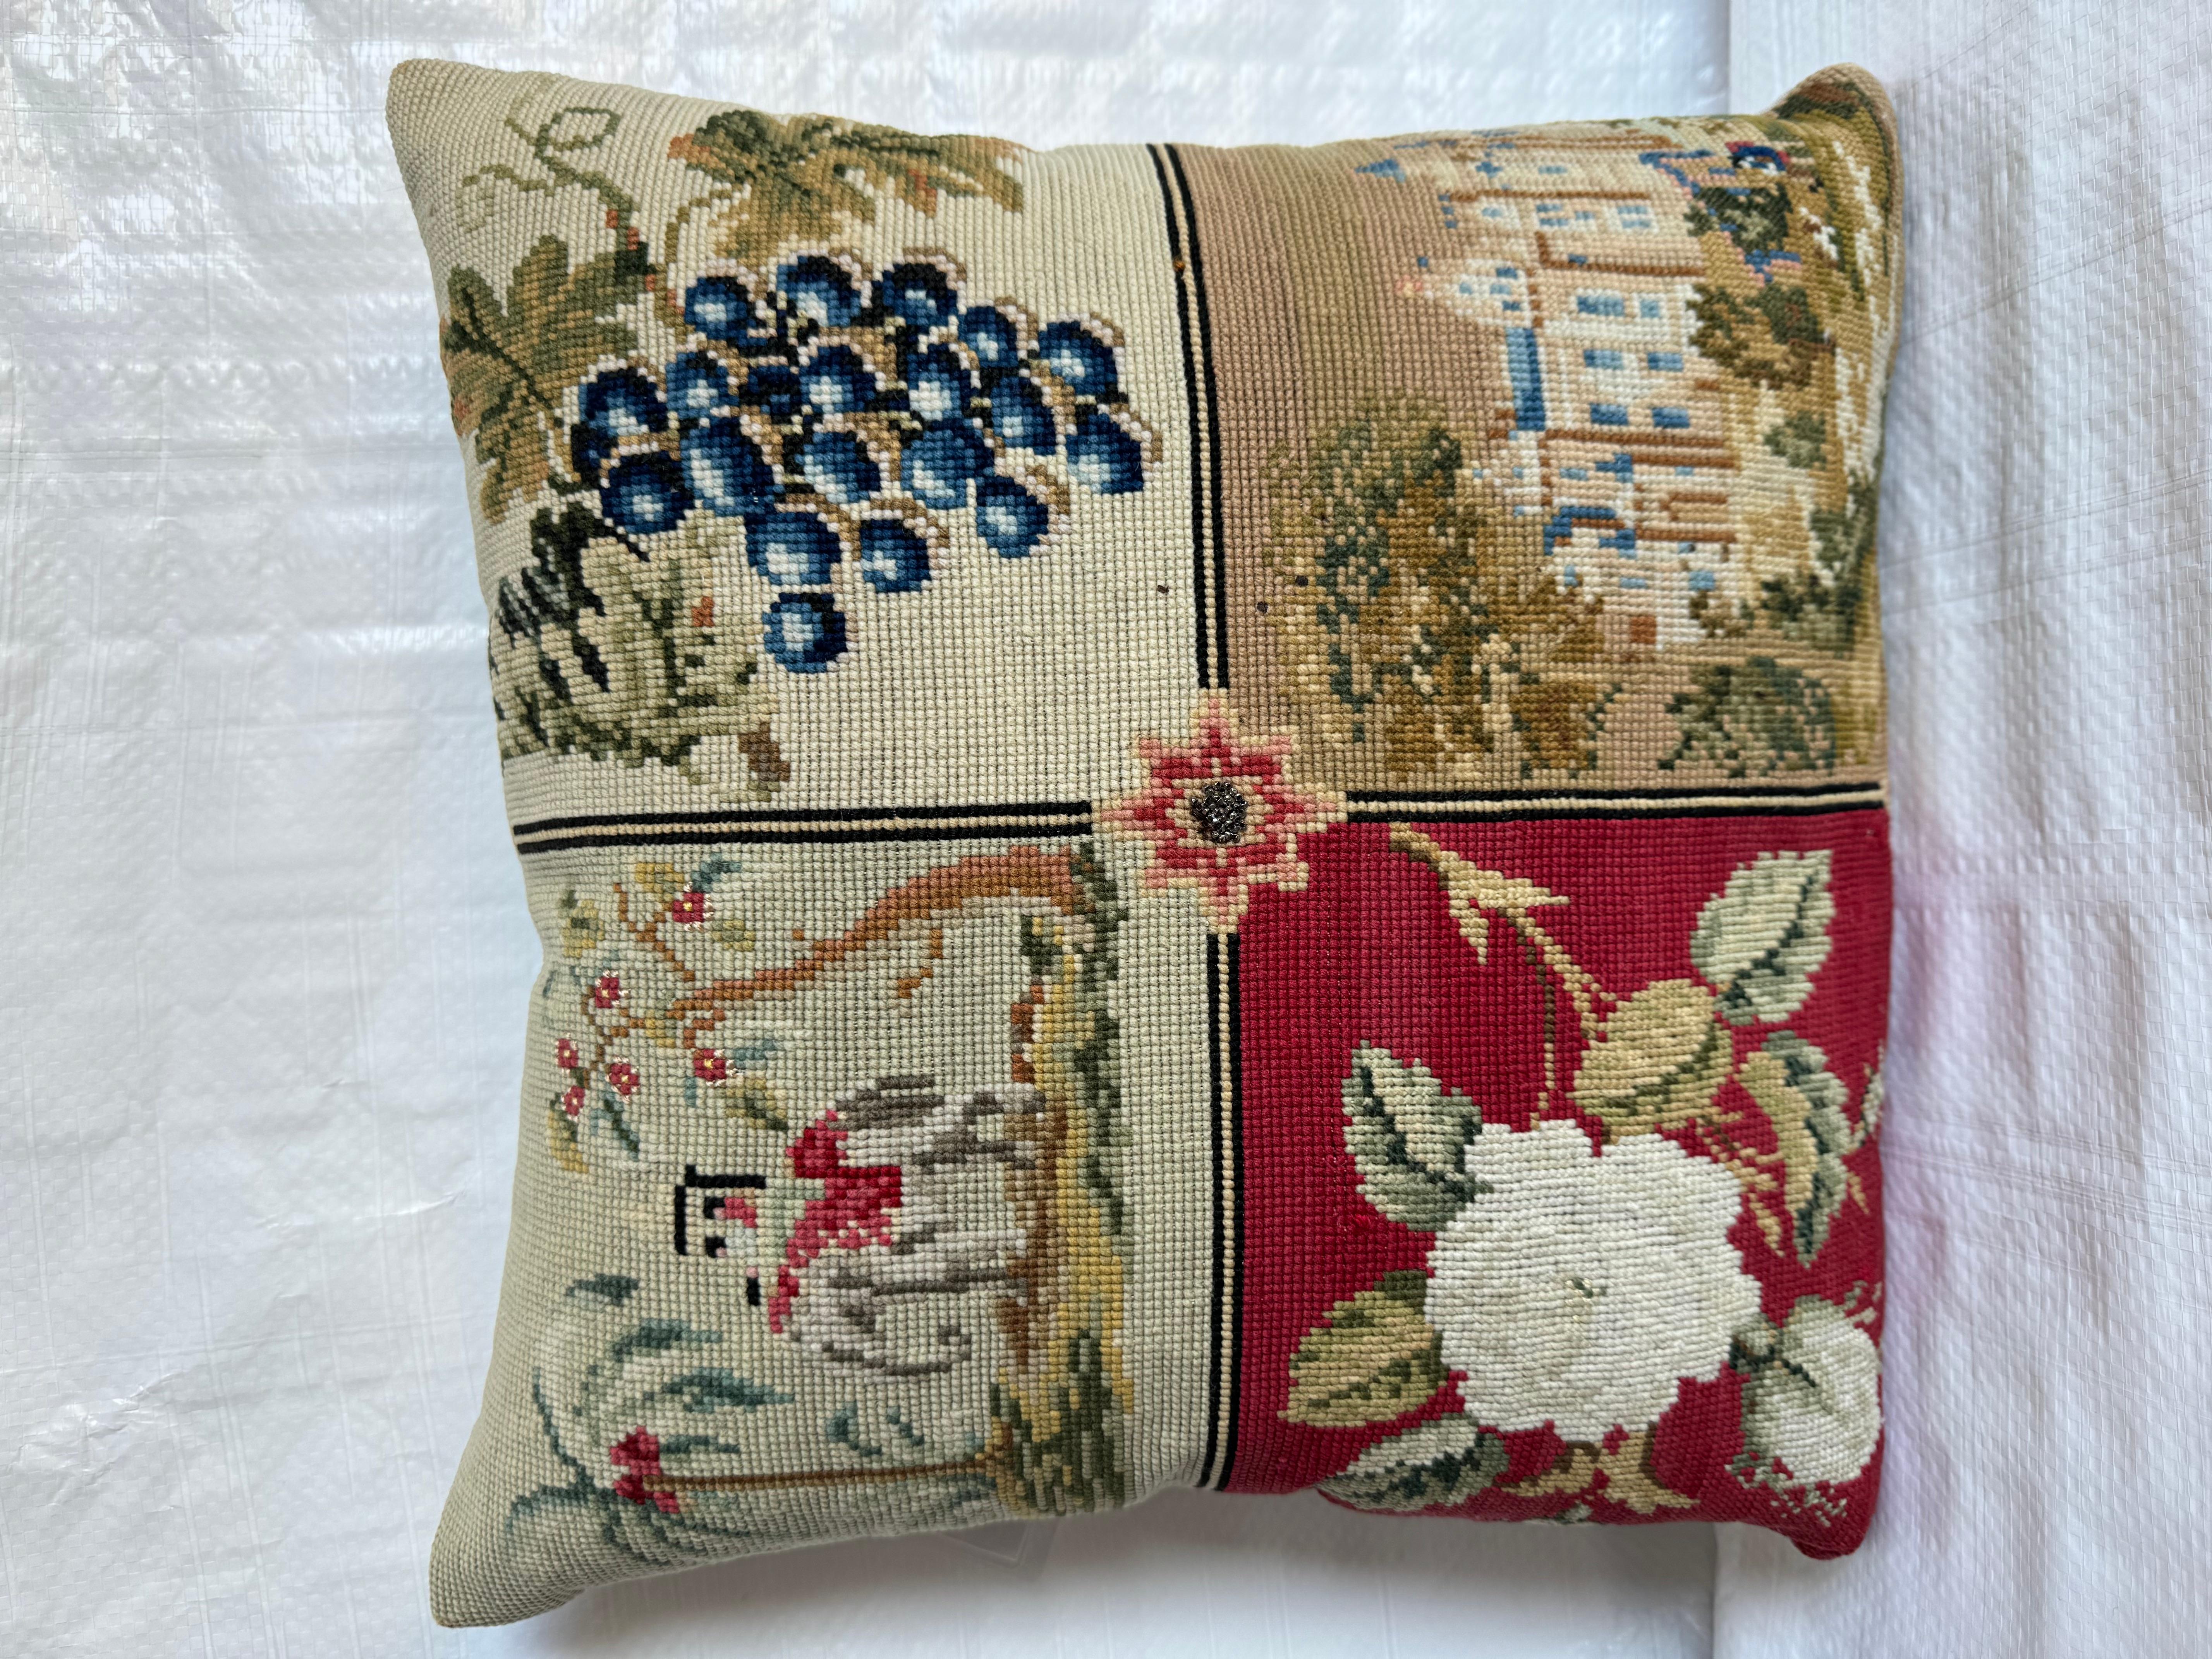 Explore the timeless charm of English Needlework with our exquisite 15